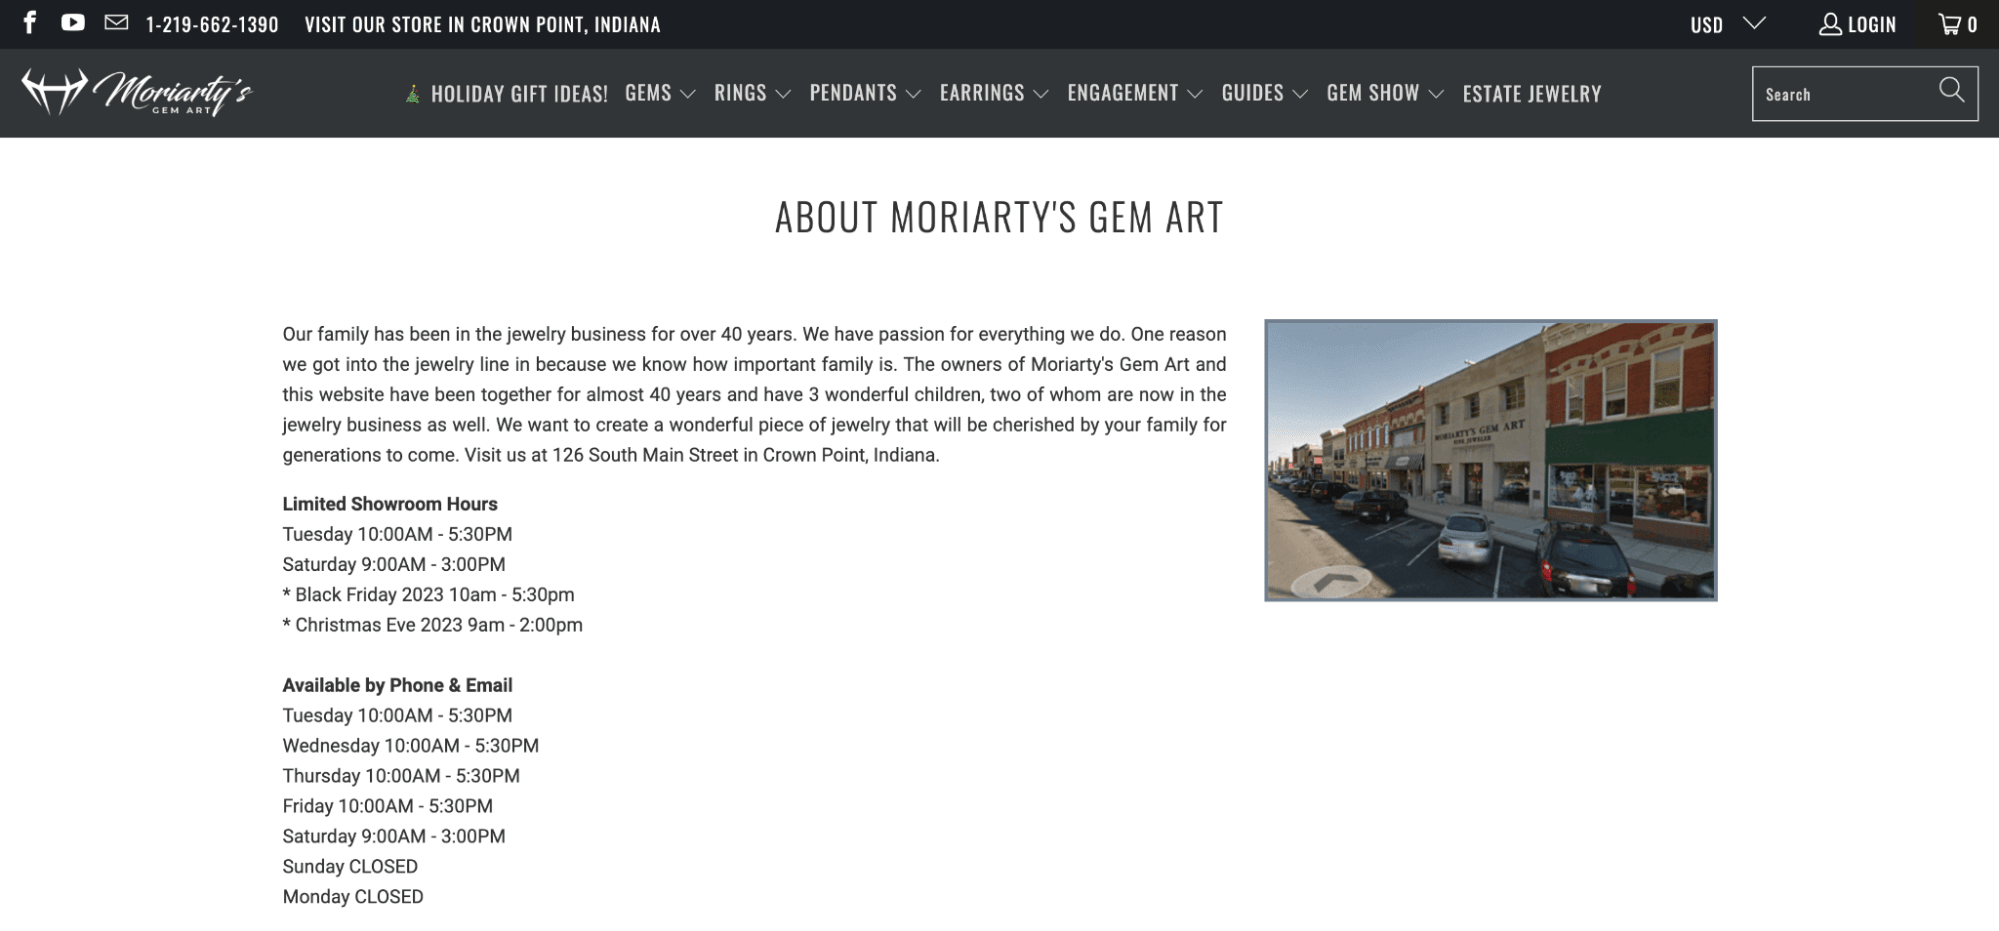 Moriarty’s Gem Art website advertises its digital offerings as well as its physical store. 